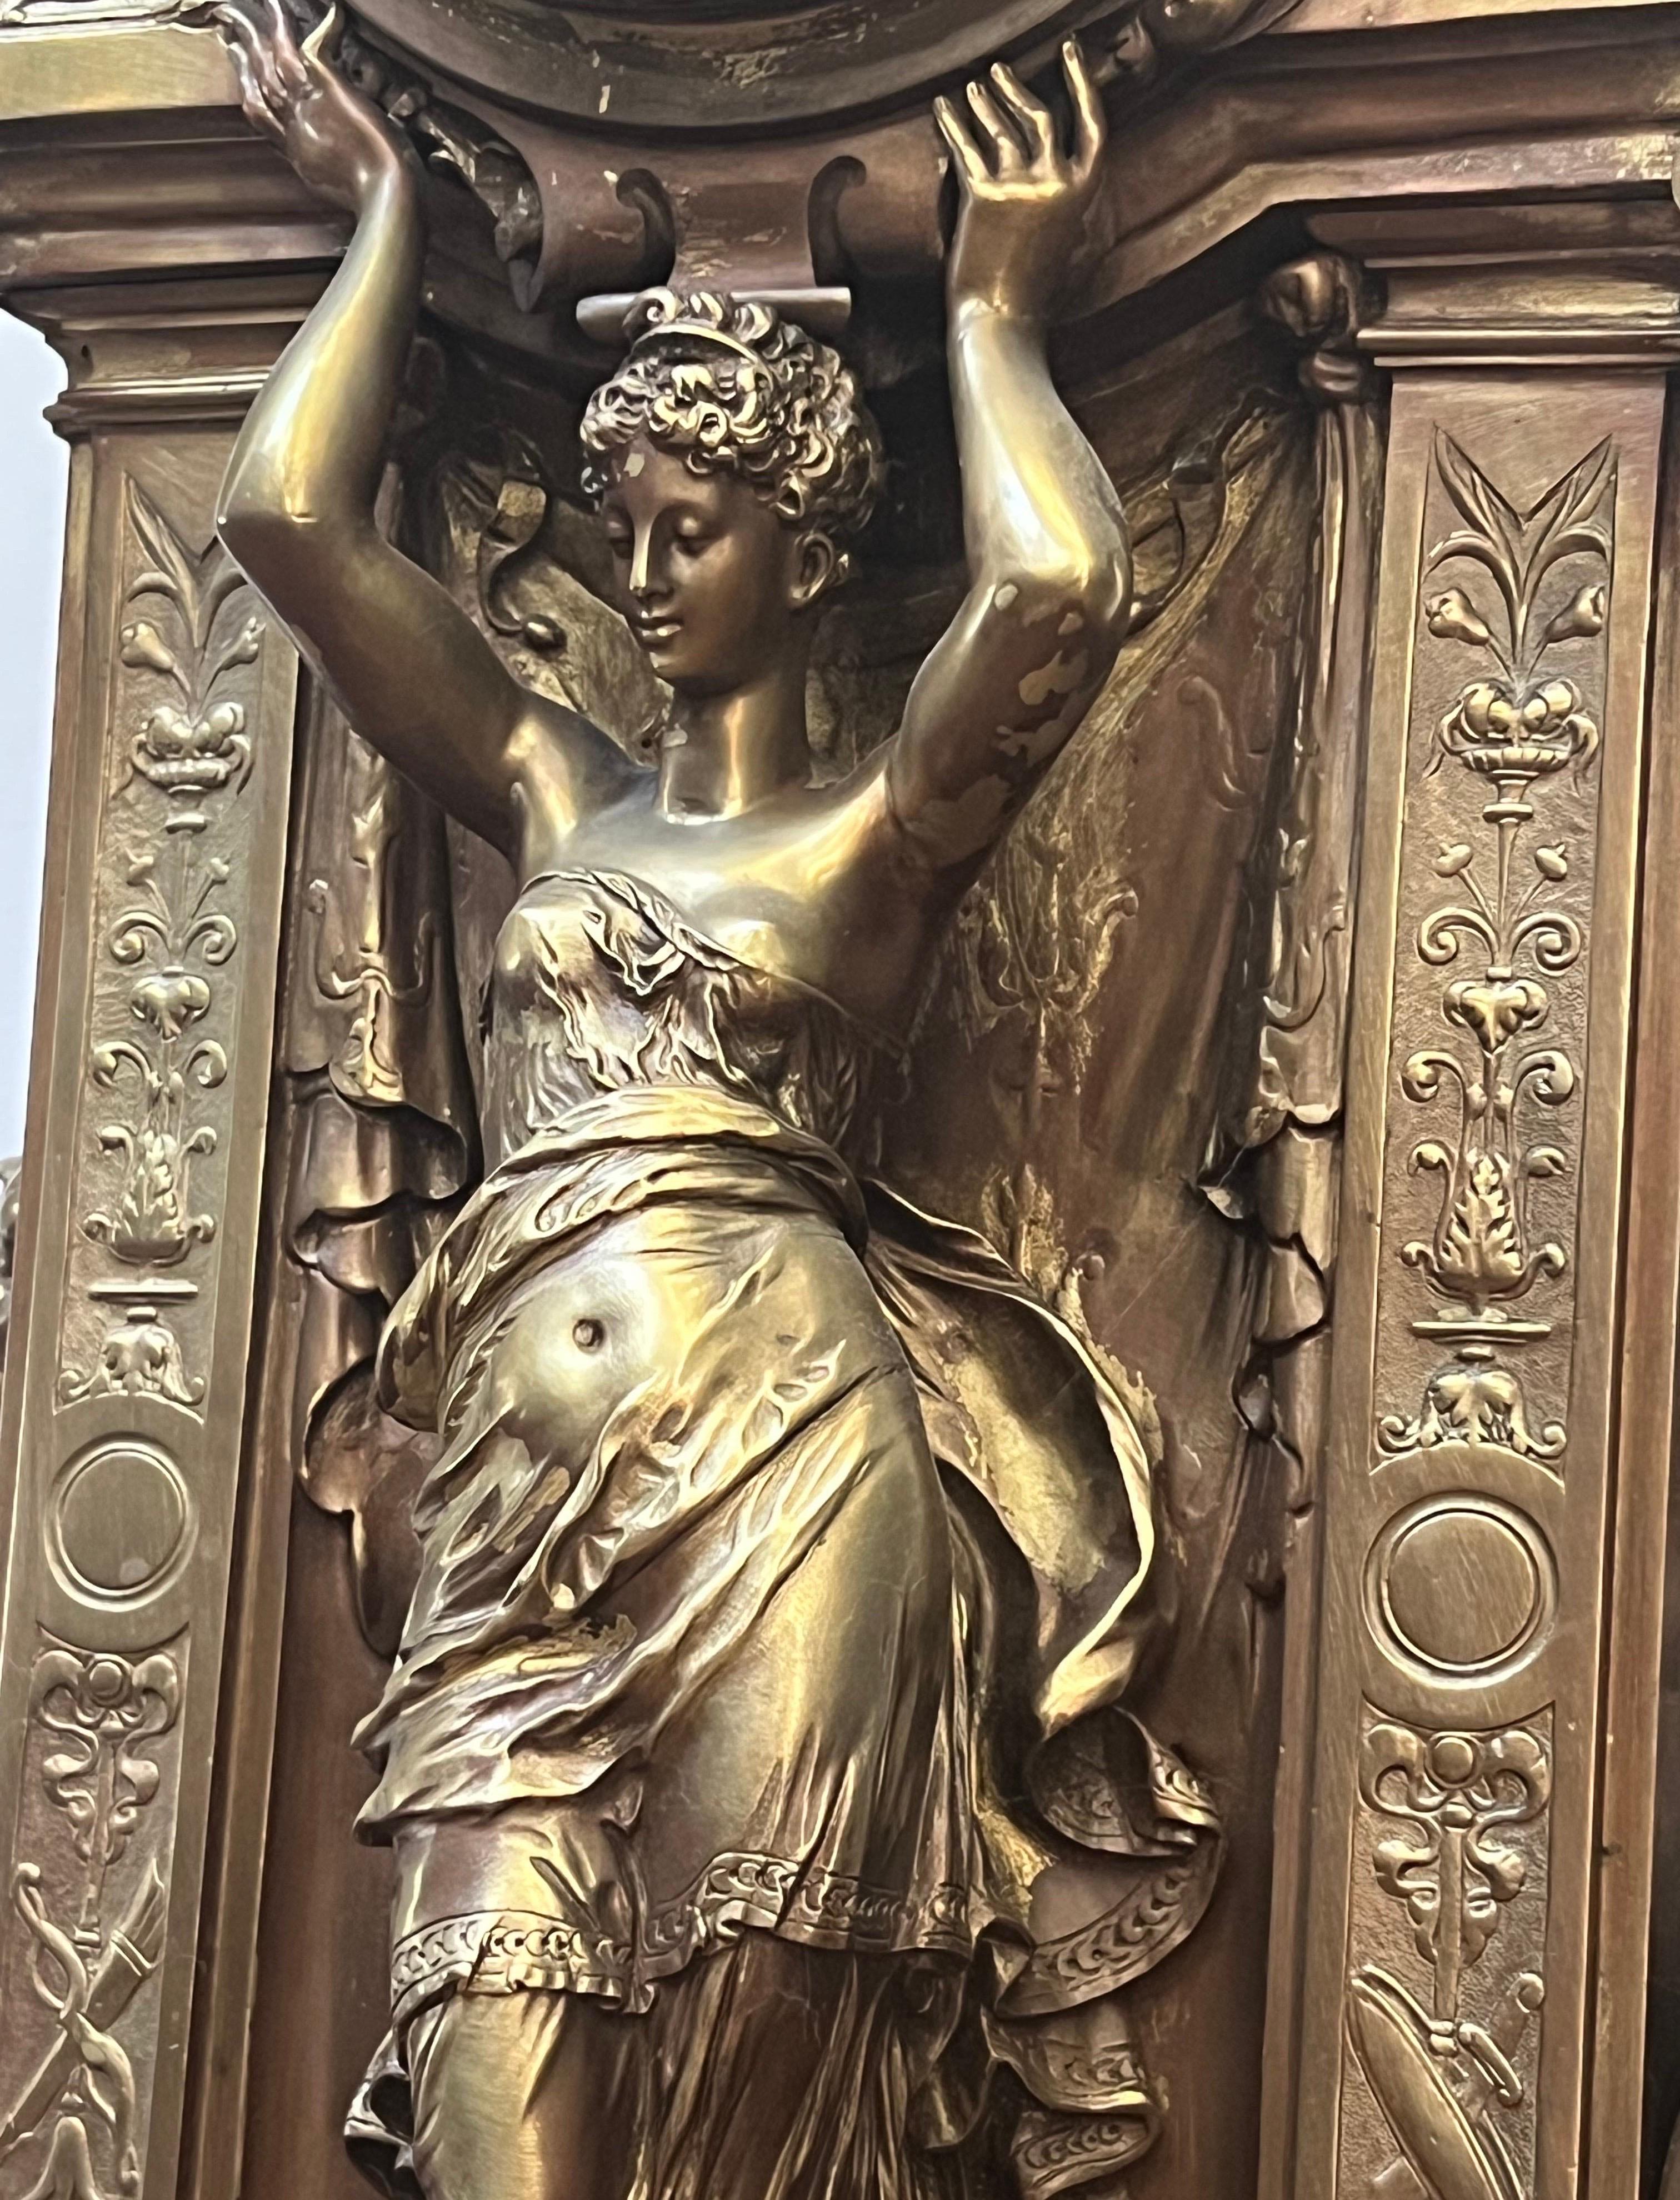 This beautiful 19th Century clock has exquisite attention to detail.  Cherubs are back to back at the top bell tower while a draped women holds the clock above her head.  